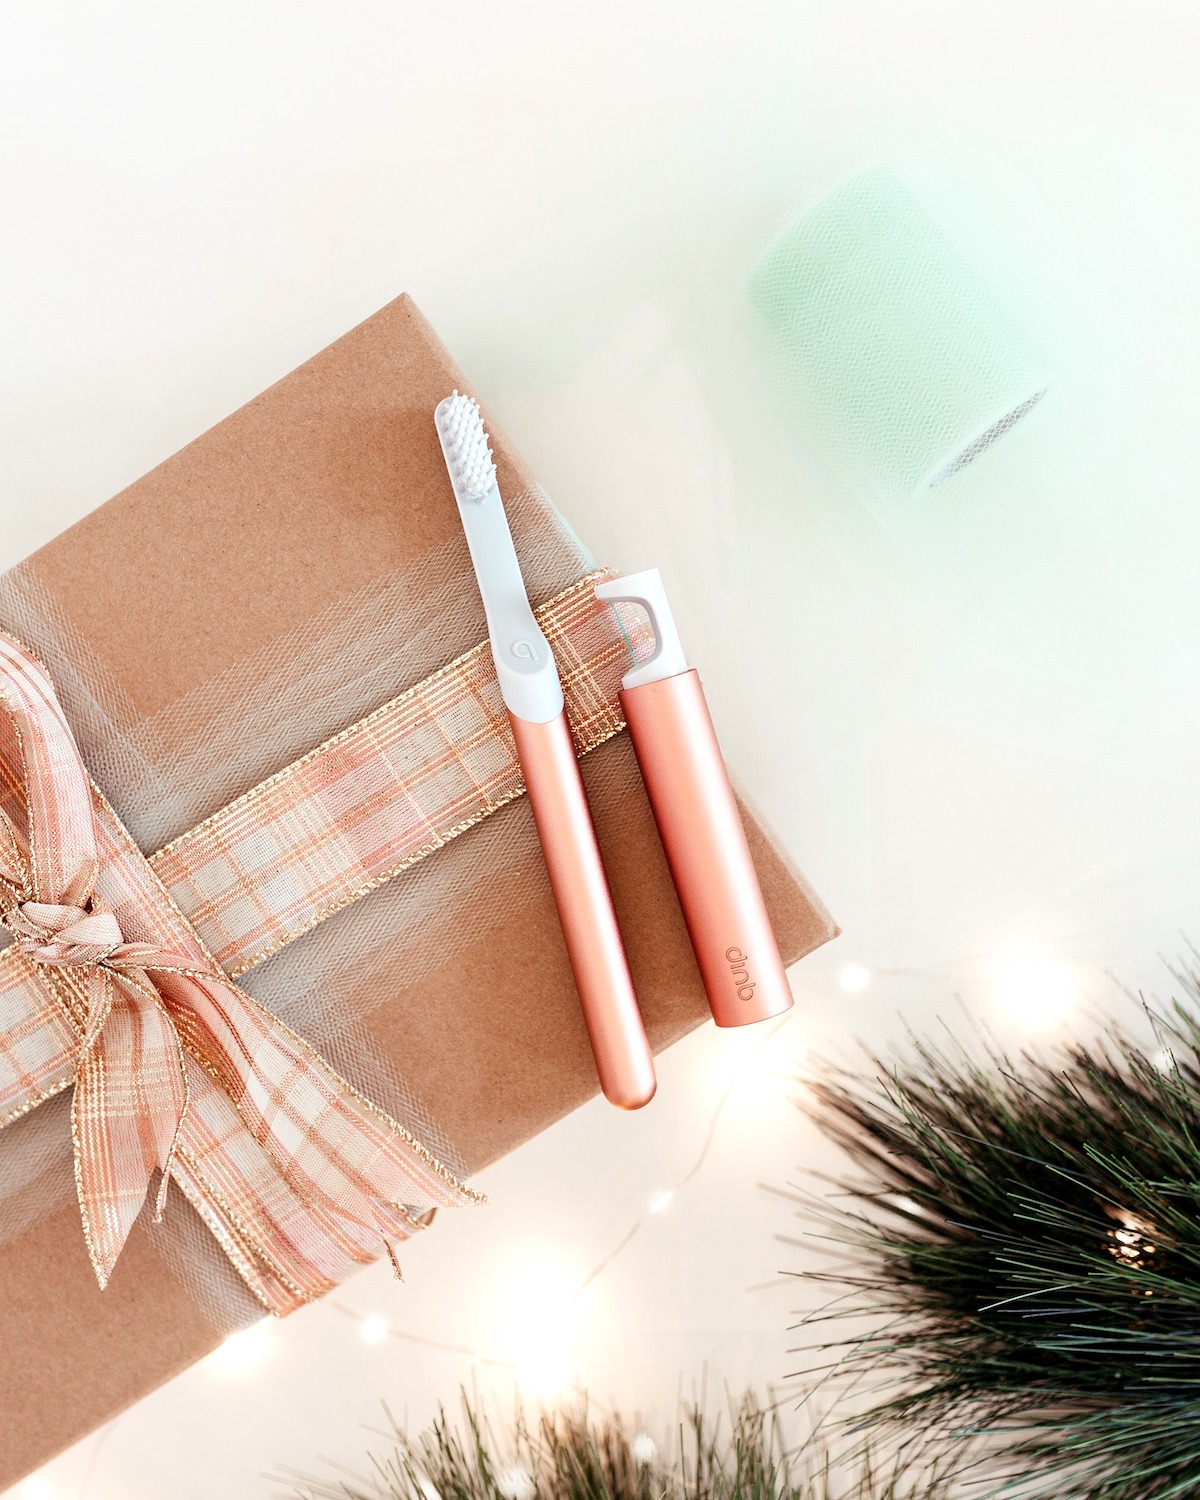 22 Wonderful Self Care Gifts This Christmas: Treat Yourself!